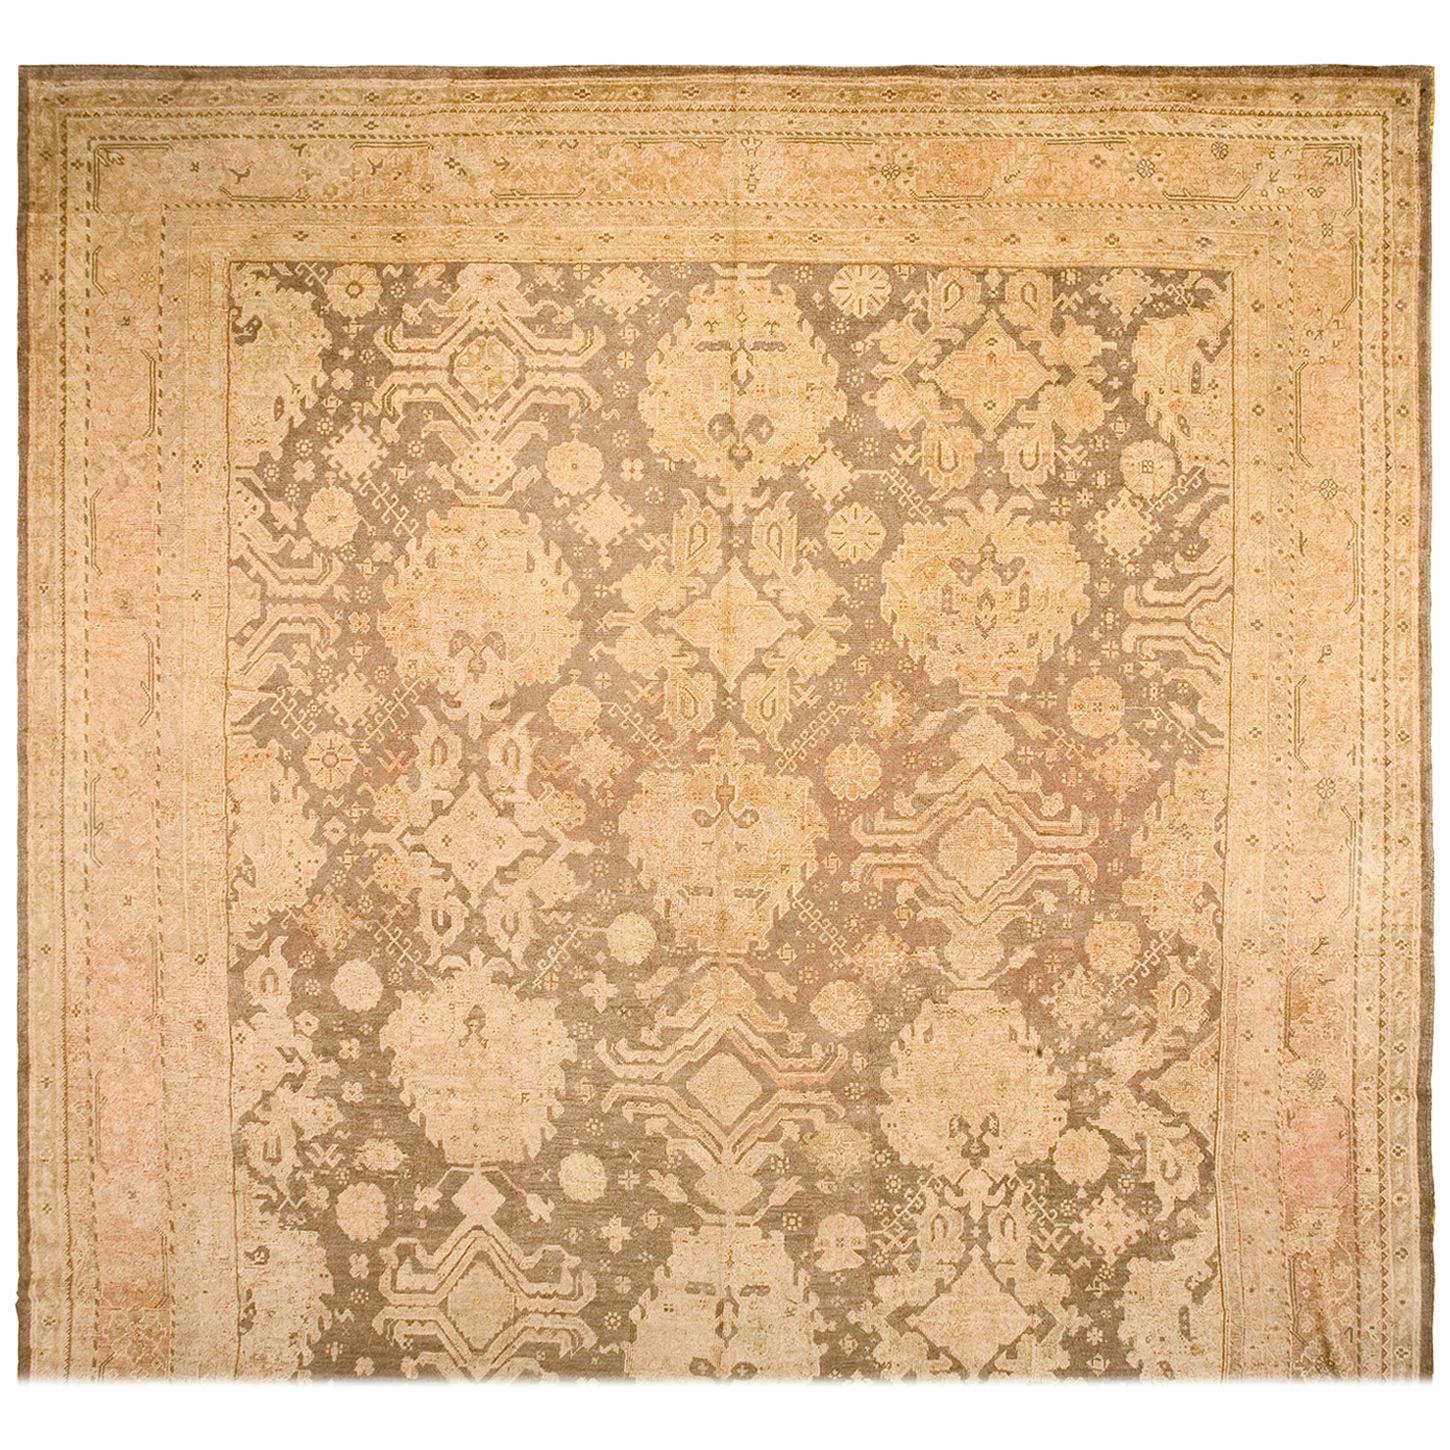 Early 20th Century Turkish Oushak Carpet ( 16' x 21'6" - 457 x 655 ) For Sale